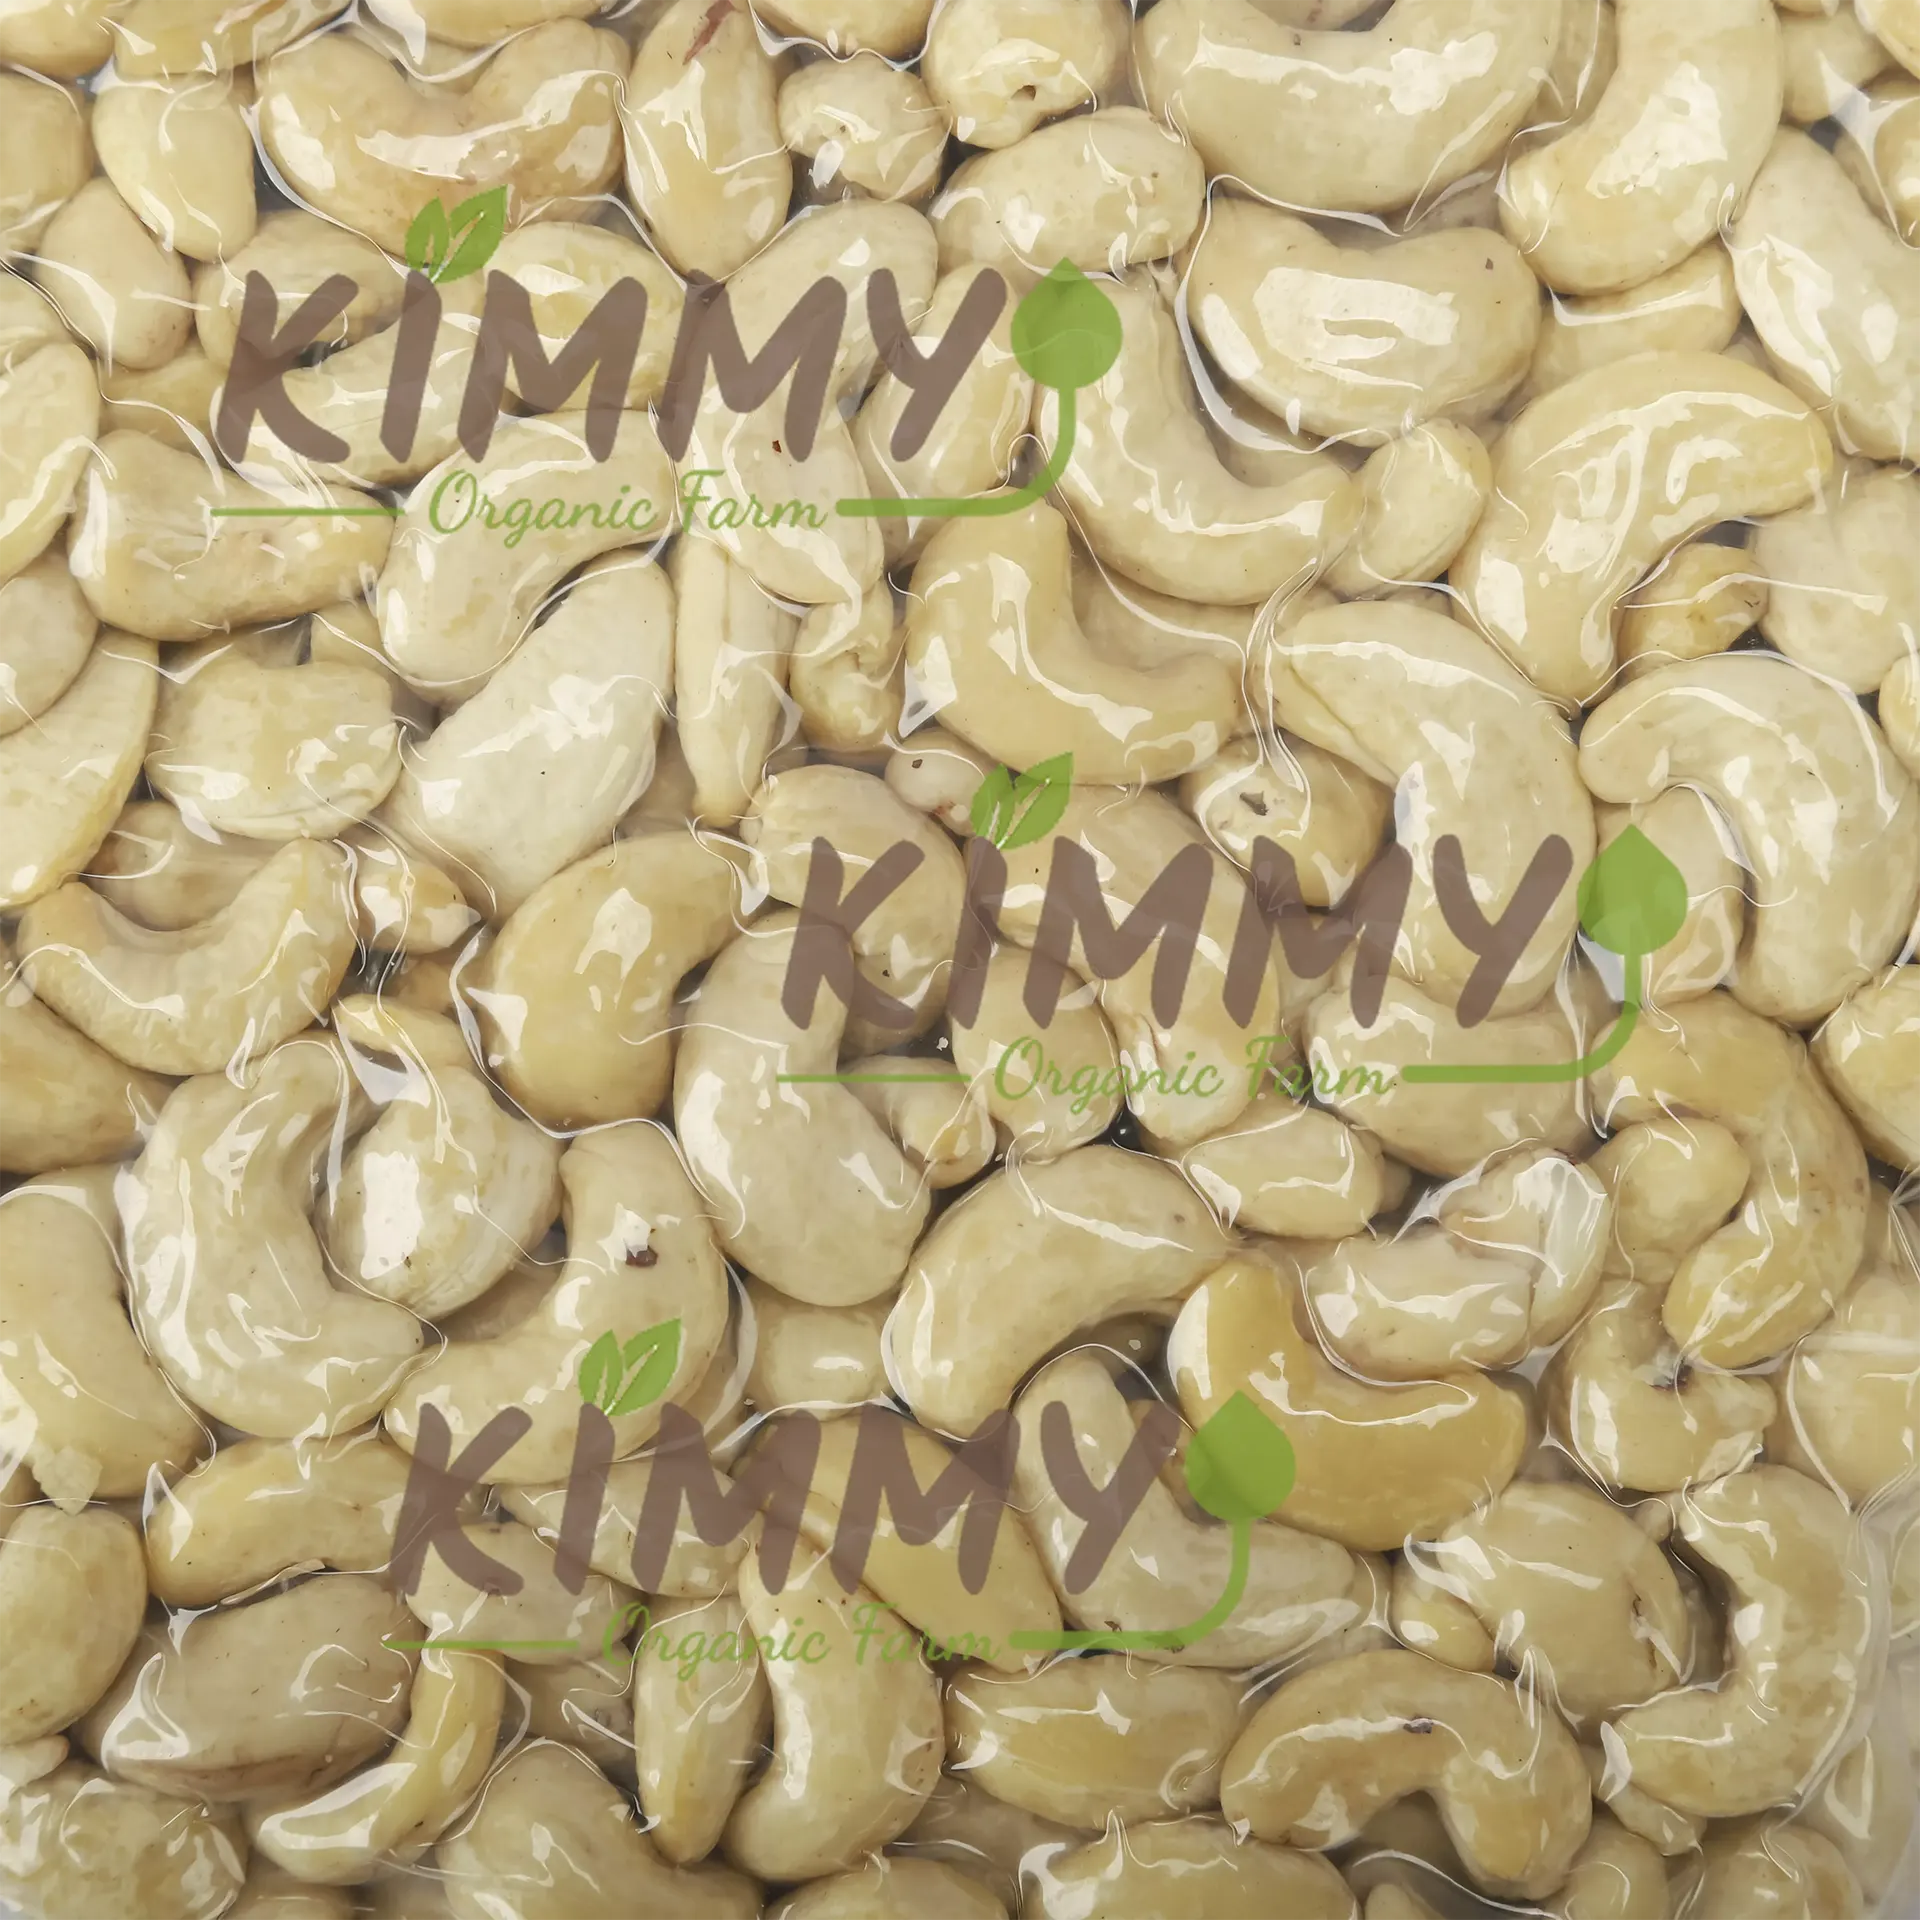 W450 Cashew With 1st Quality – 1KG Packed in Vacuum Bags – Kimmy Farm Vietnam